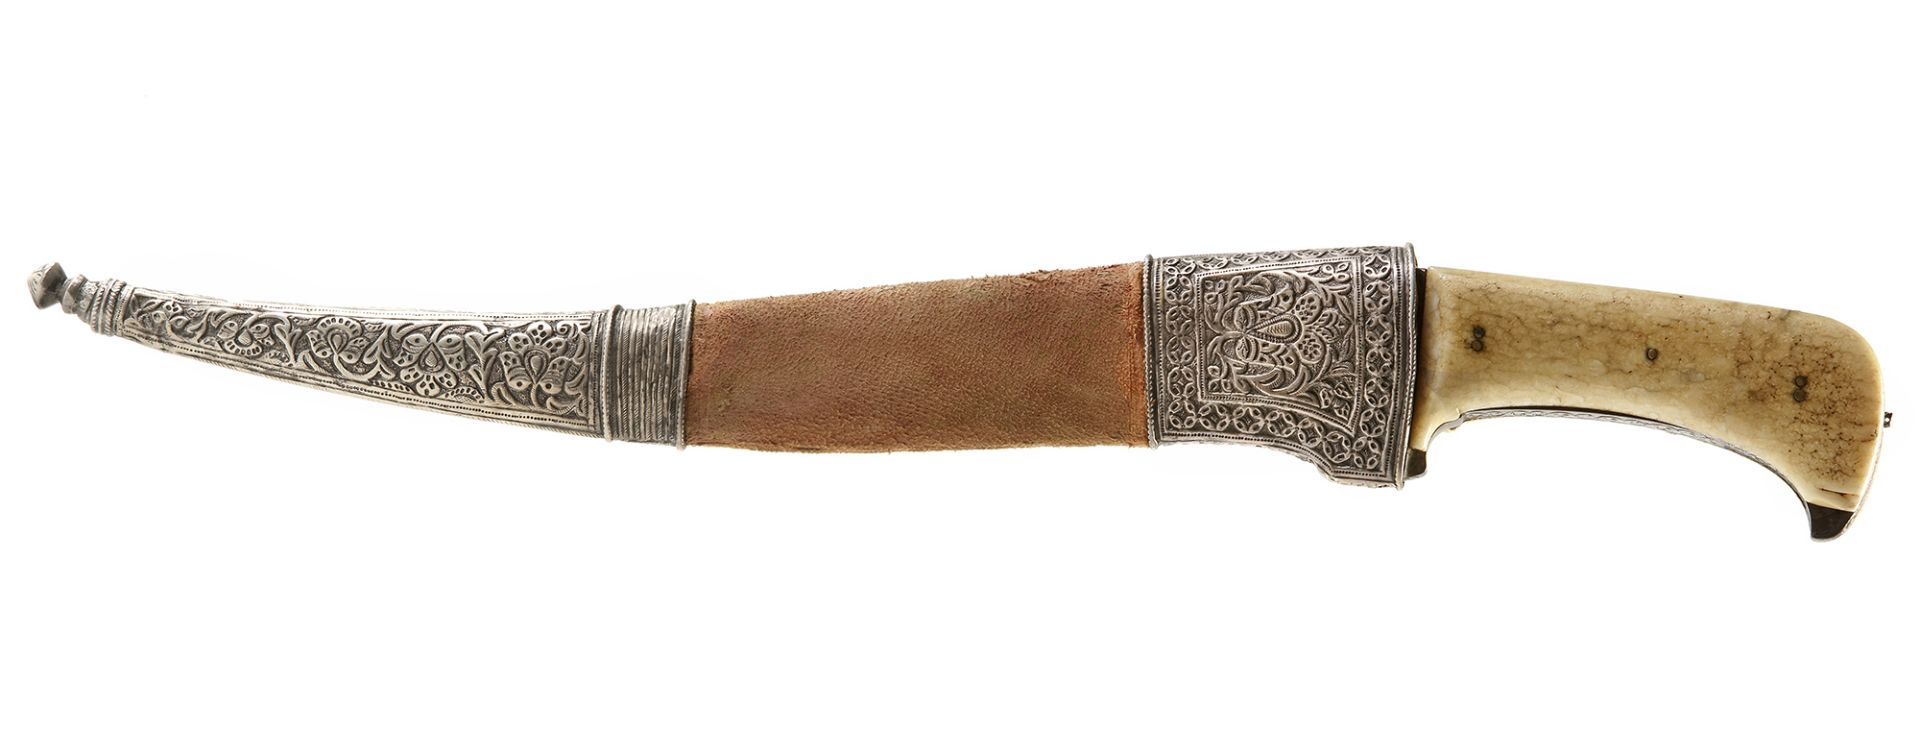 AN IVORY-HILTED WATERED-STEEL PESH-KABZ, INDIA, LATE 18TH-EARLY 19TH CENTURY - Bild 2 aus 12